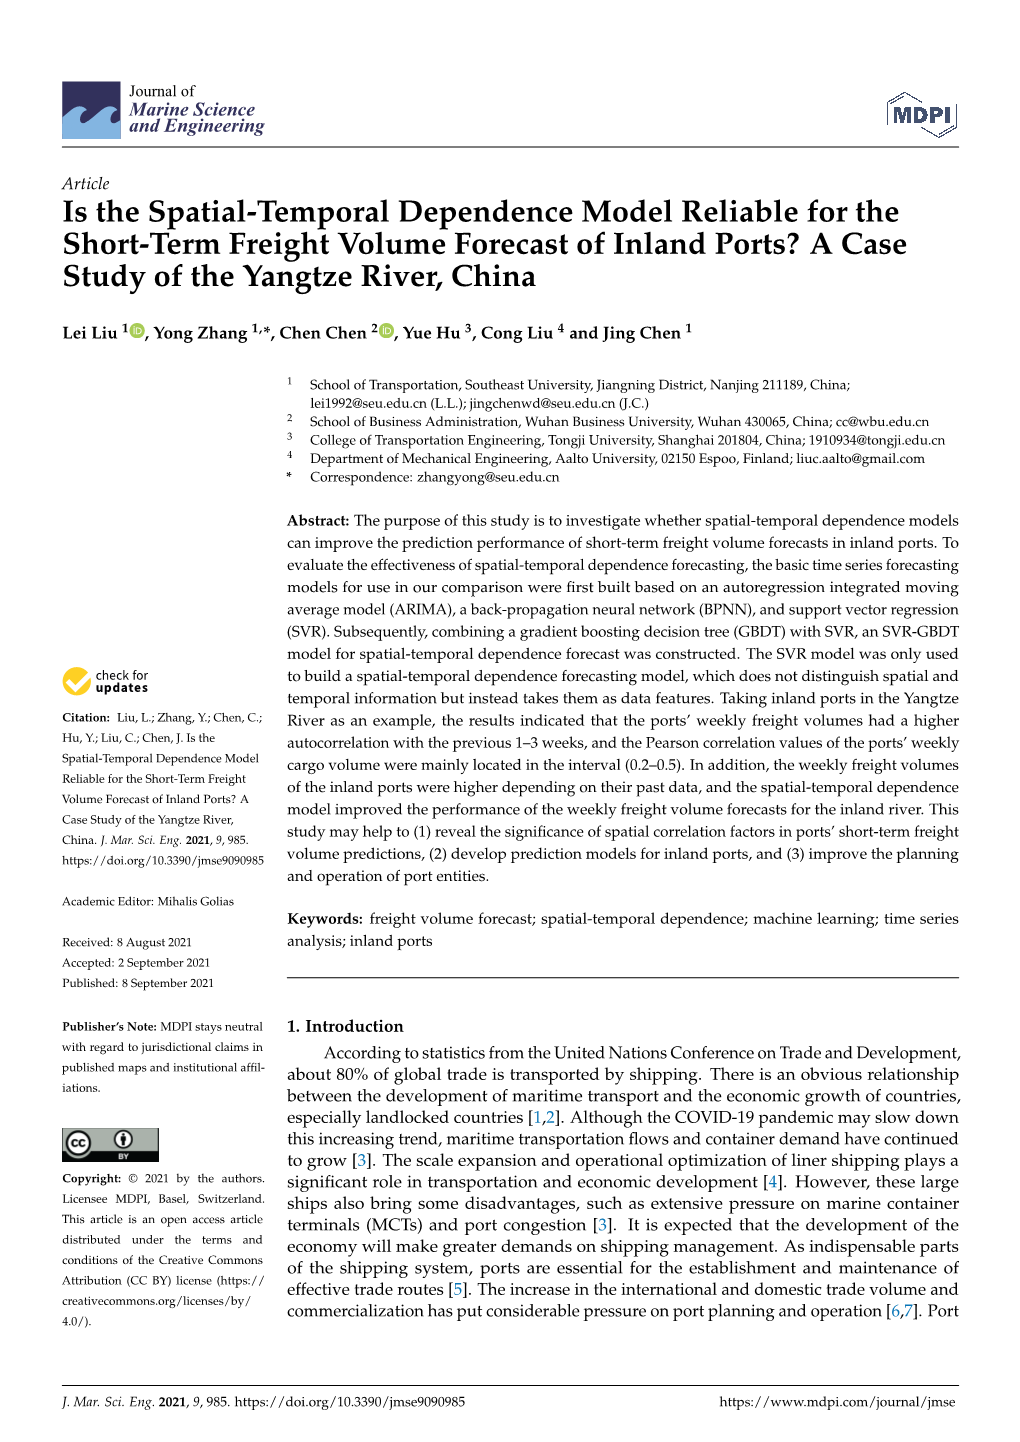 Is the Spatial-Temporal Dependence Model Reliable for the Short-Term Freight Volume Forecast of Inland Ports? a Case Study of the Yangtze River, China